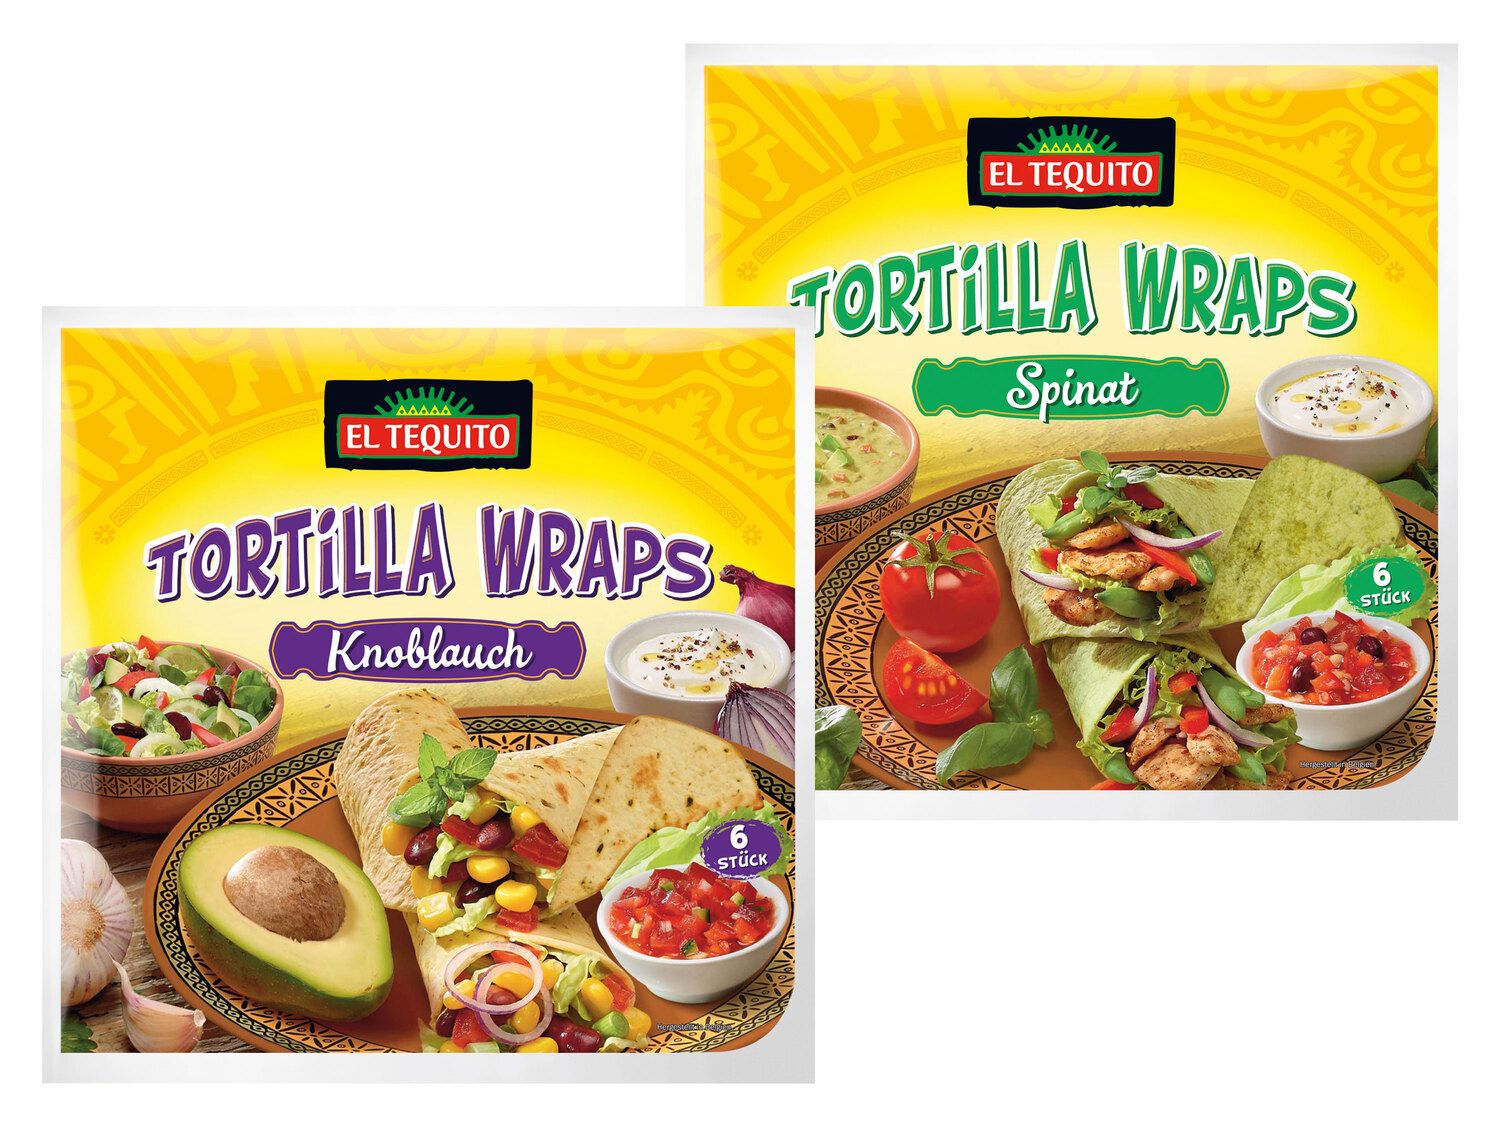 Price wraps Lidl Products like: / tortilla tequito ᐉ - Compare el